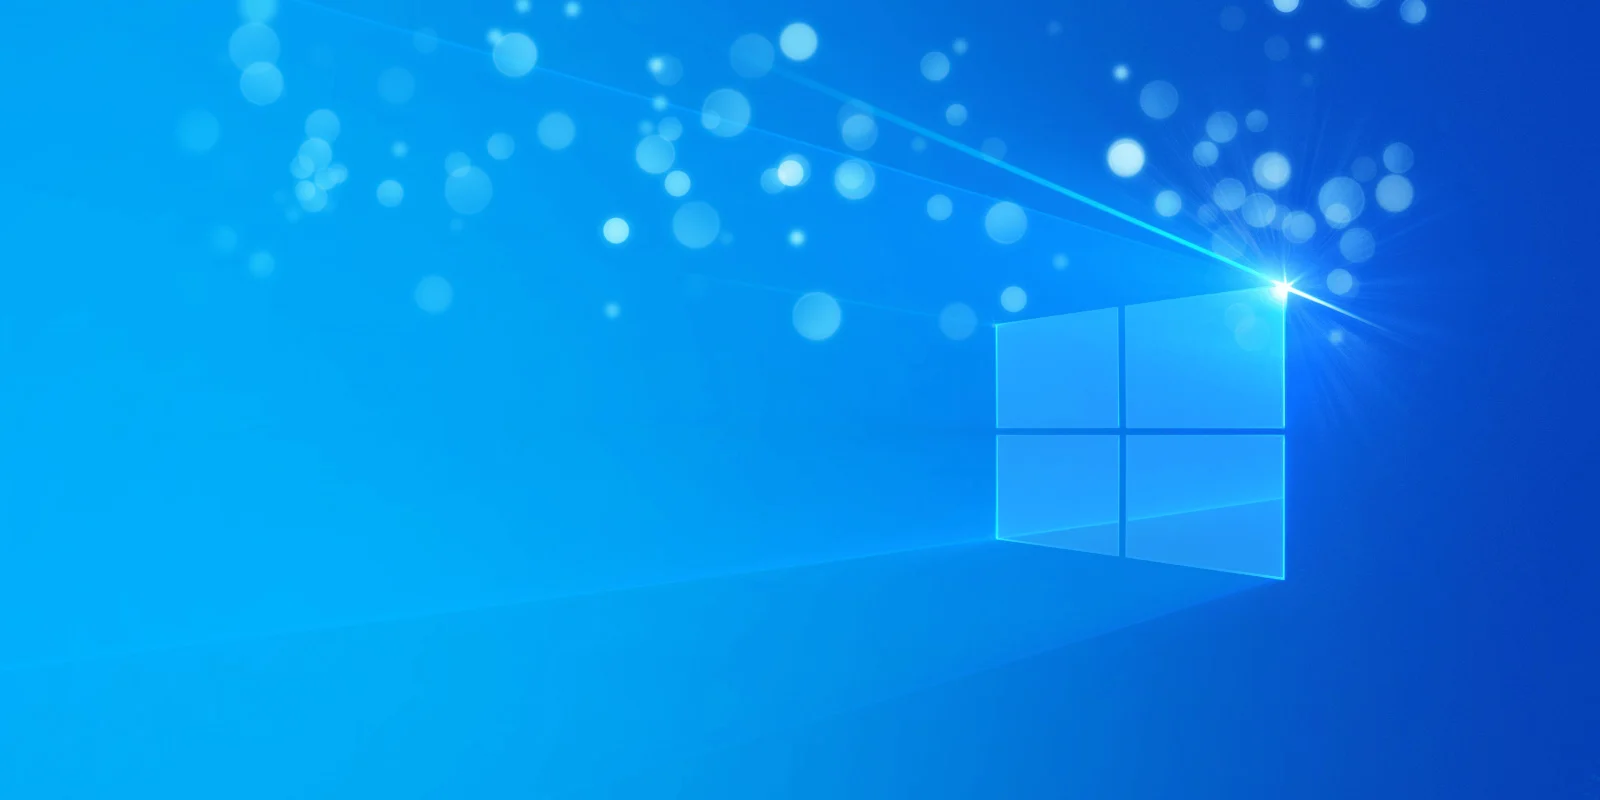 How Do I Know if I Have Windows 10?